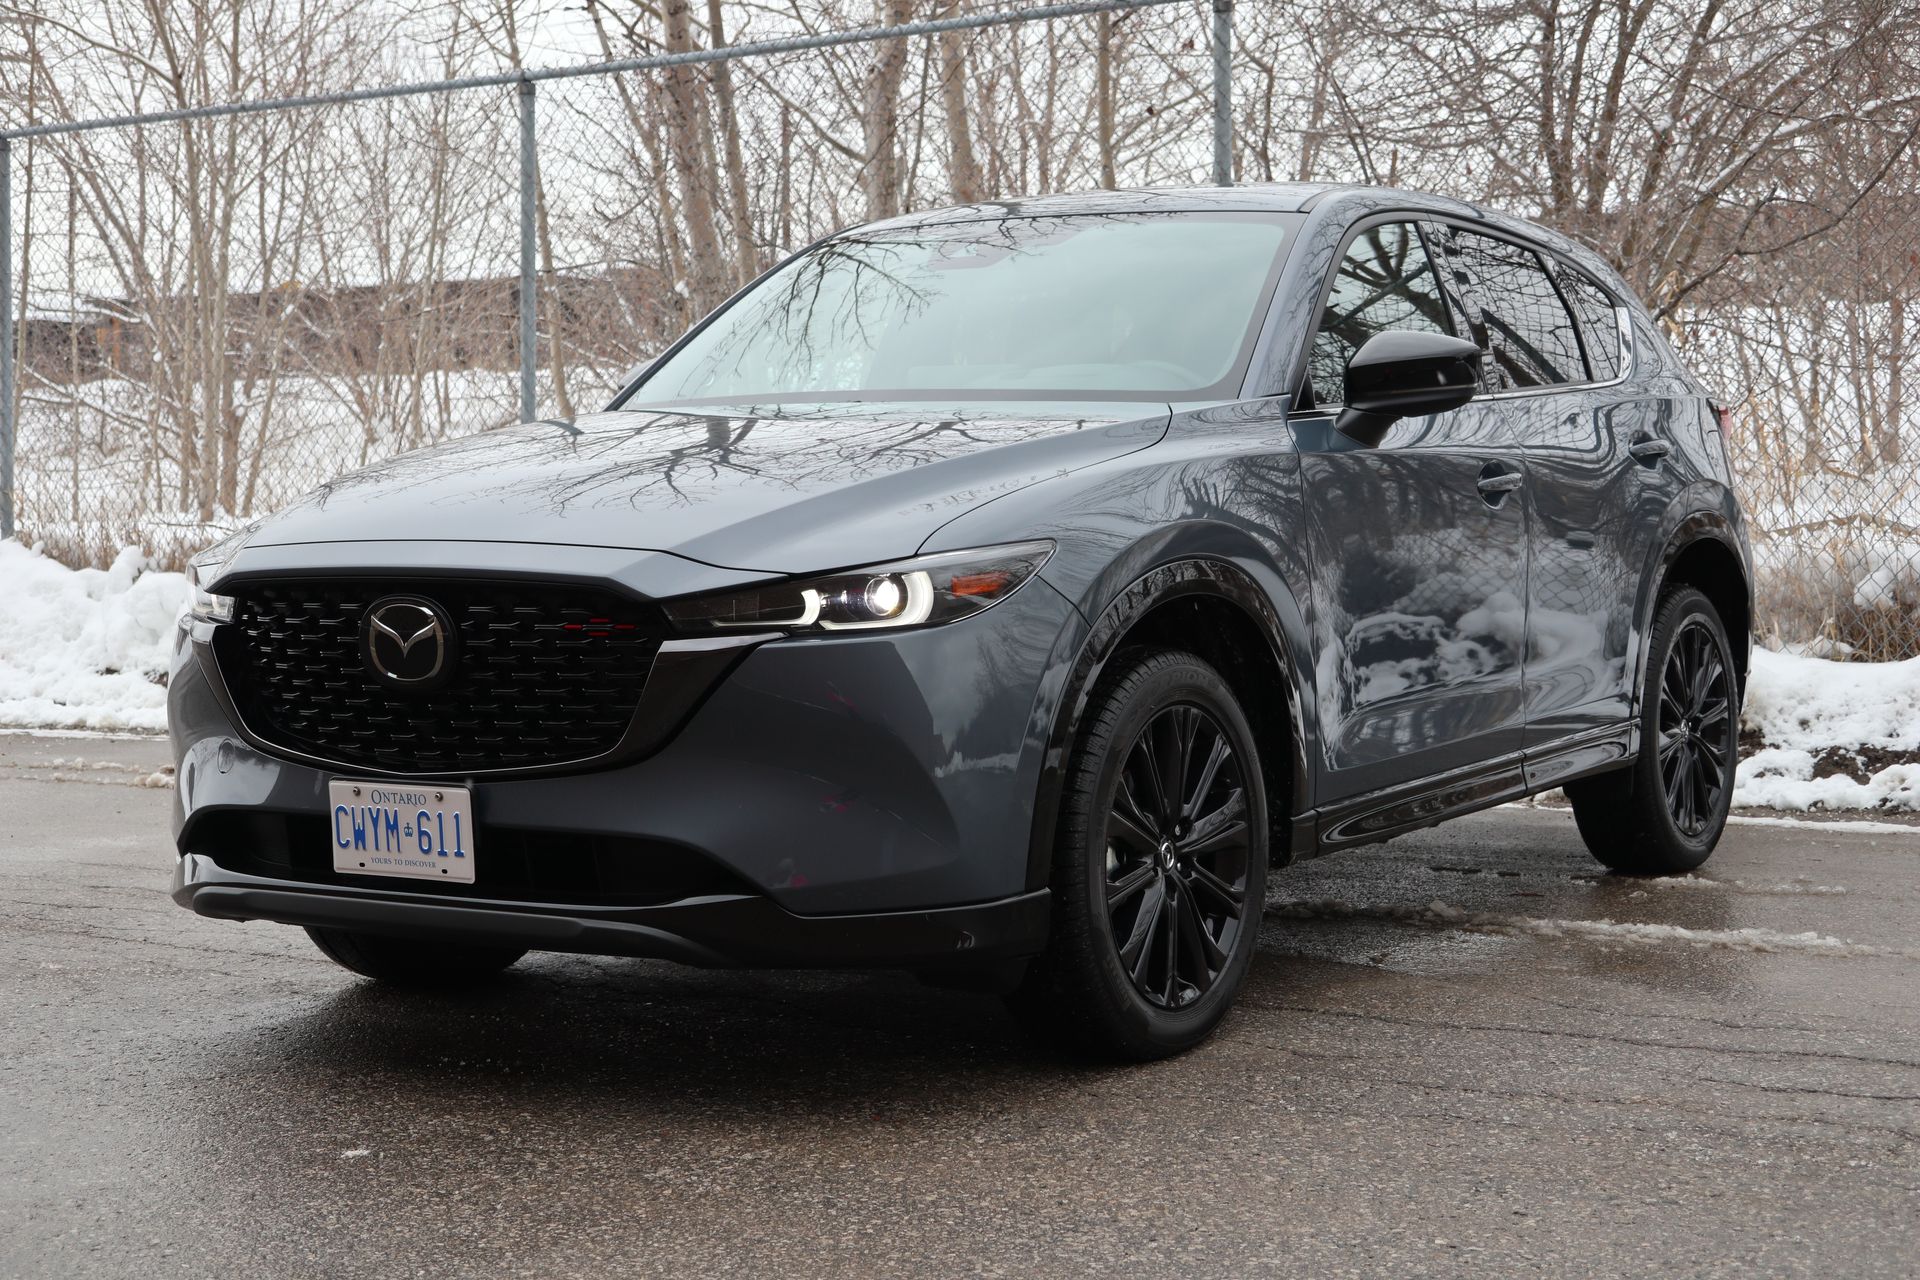 New 2023 Mazda CX-5 2.5 S Premium Package 4D Sport Utility in Mission  #20999